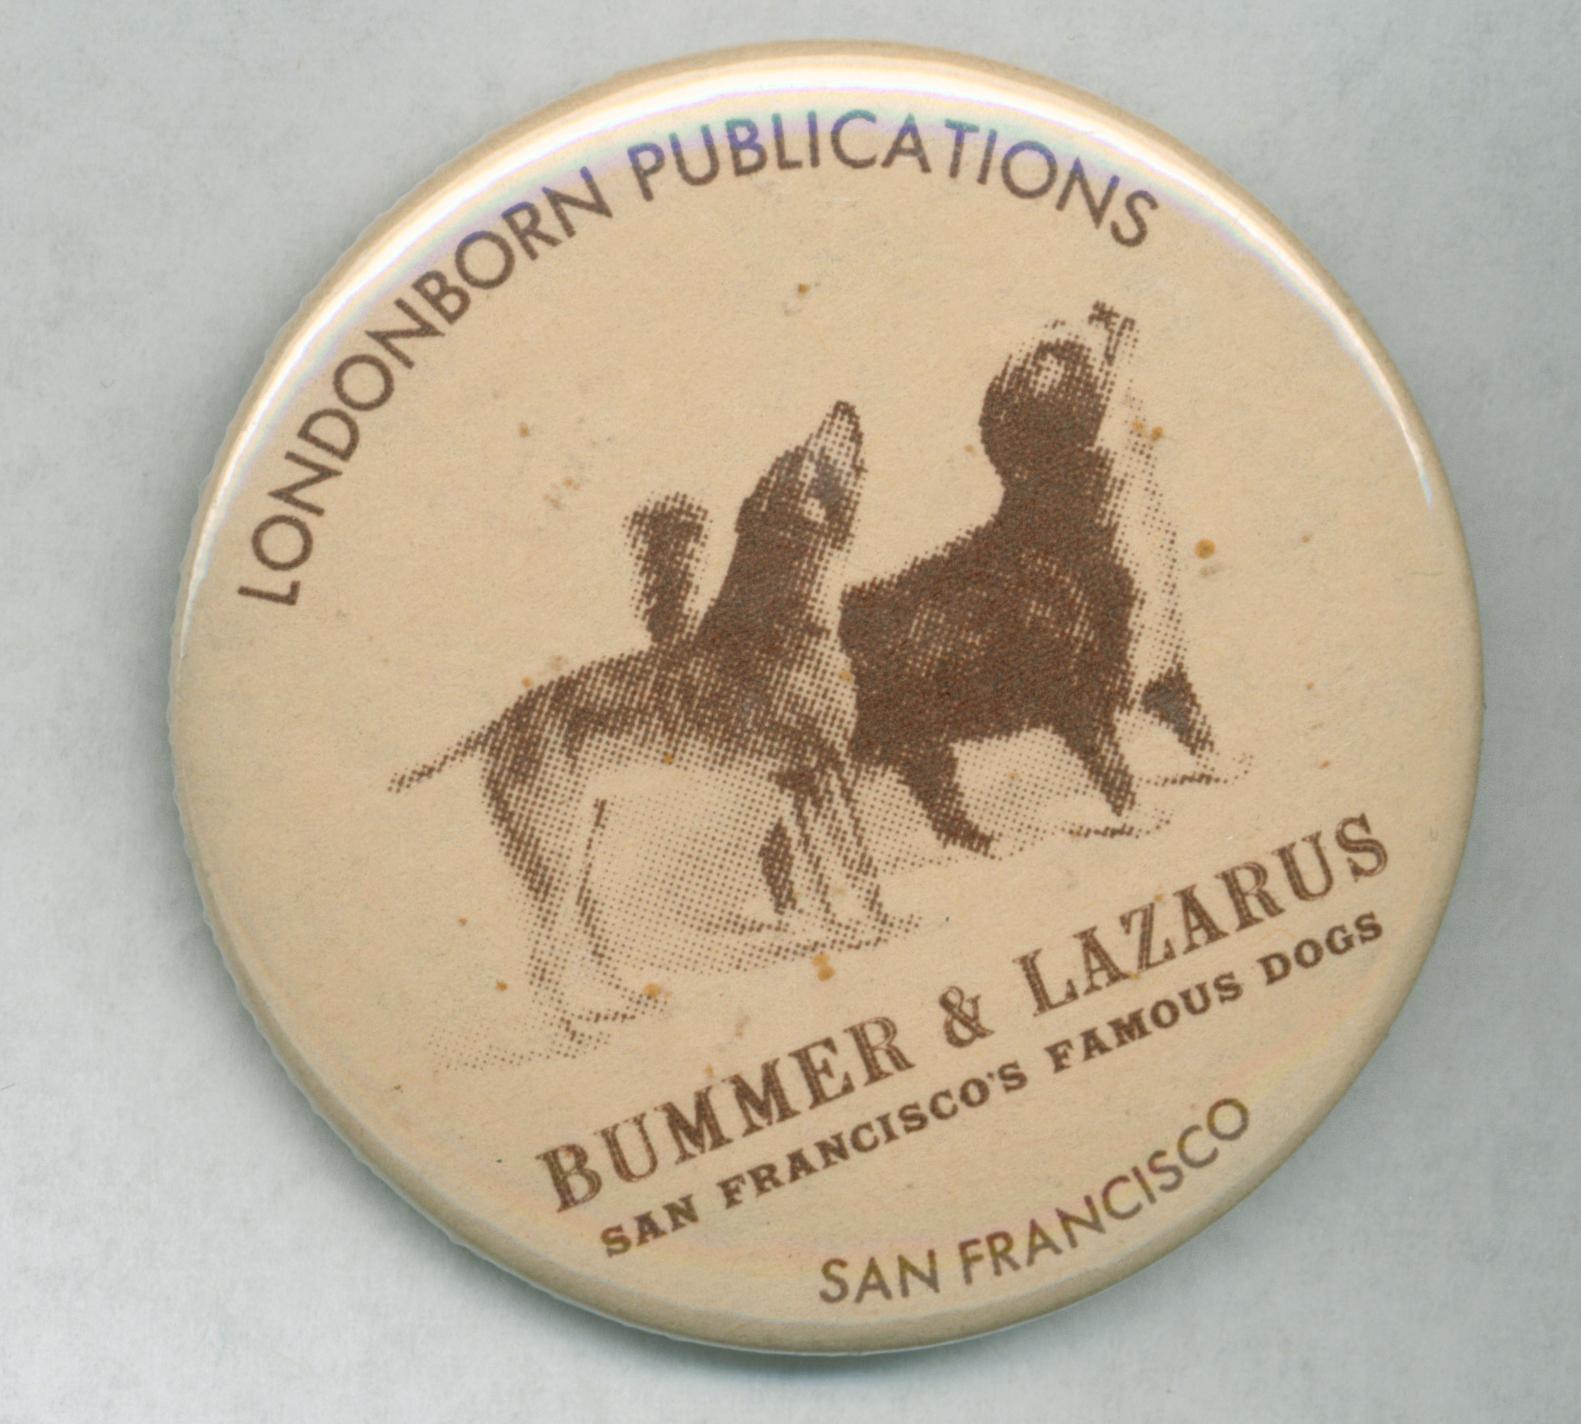  Continued text on button:  'San Francisco's famous dogs.'